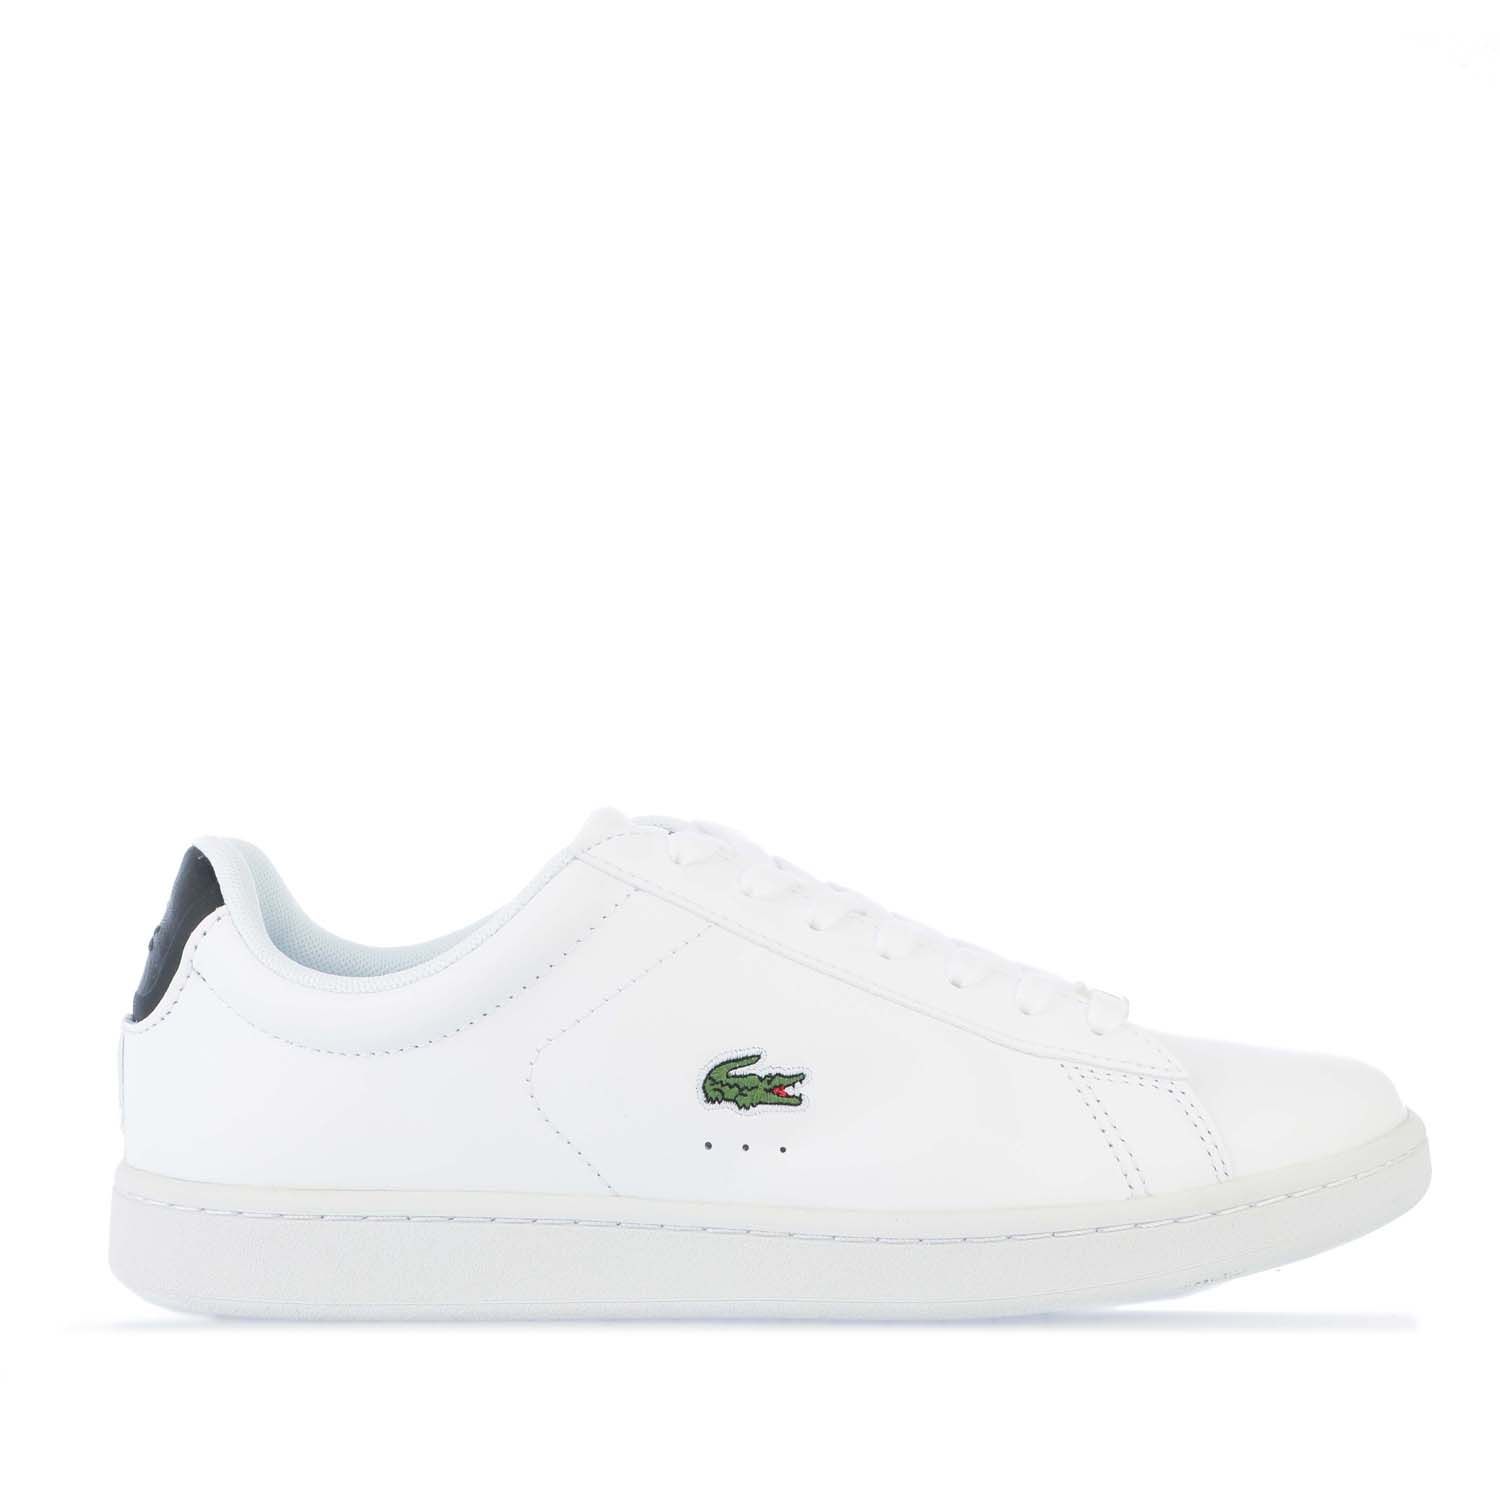 Sequel Antage Trivial White Black Lacoste Womens Carnaby Evo Trainers - Get The Label